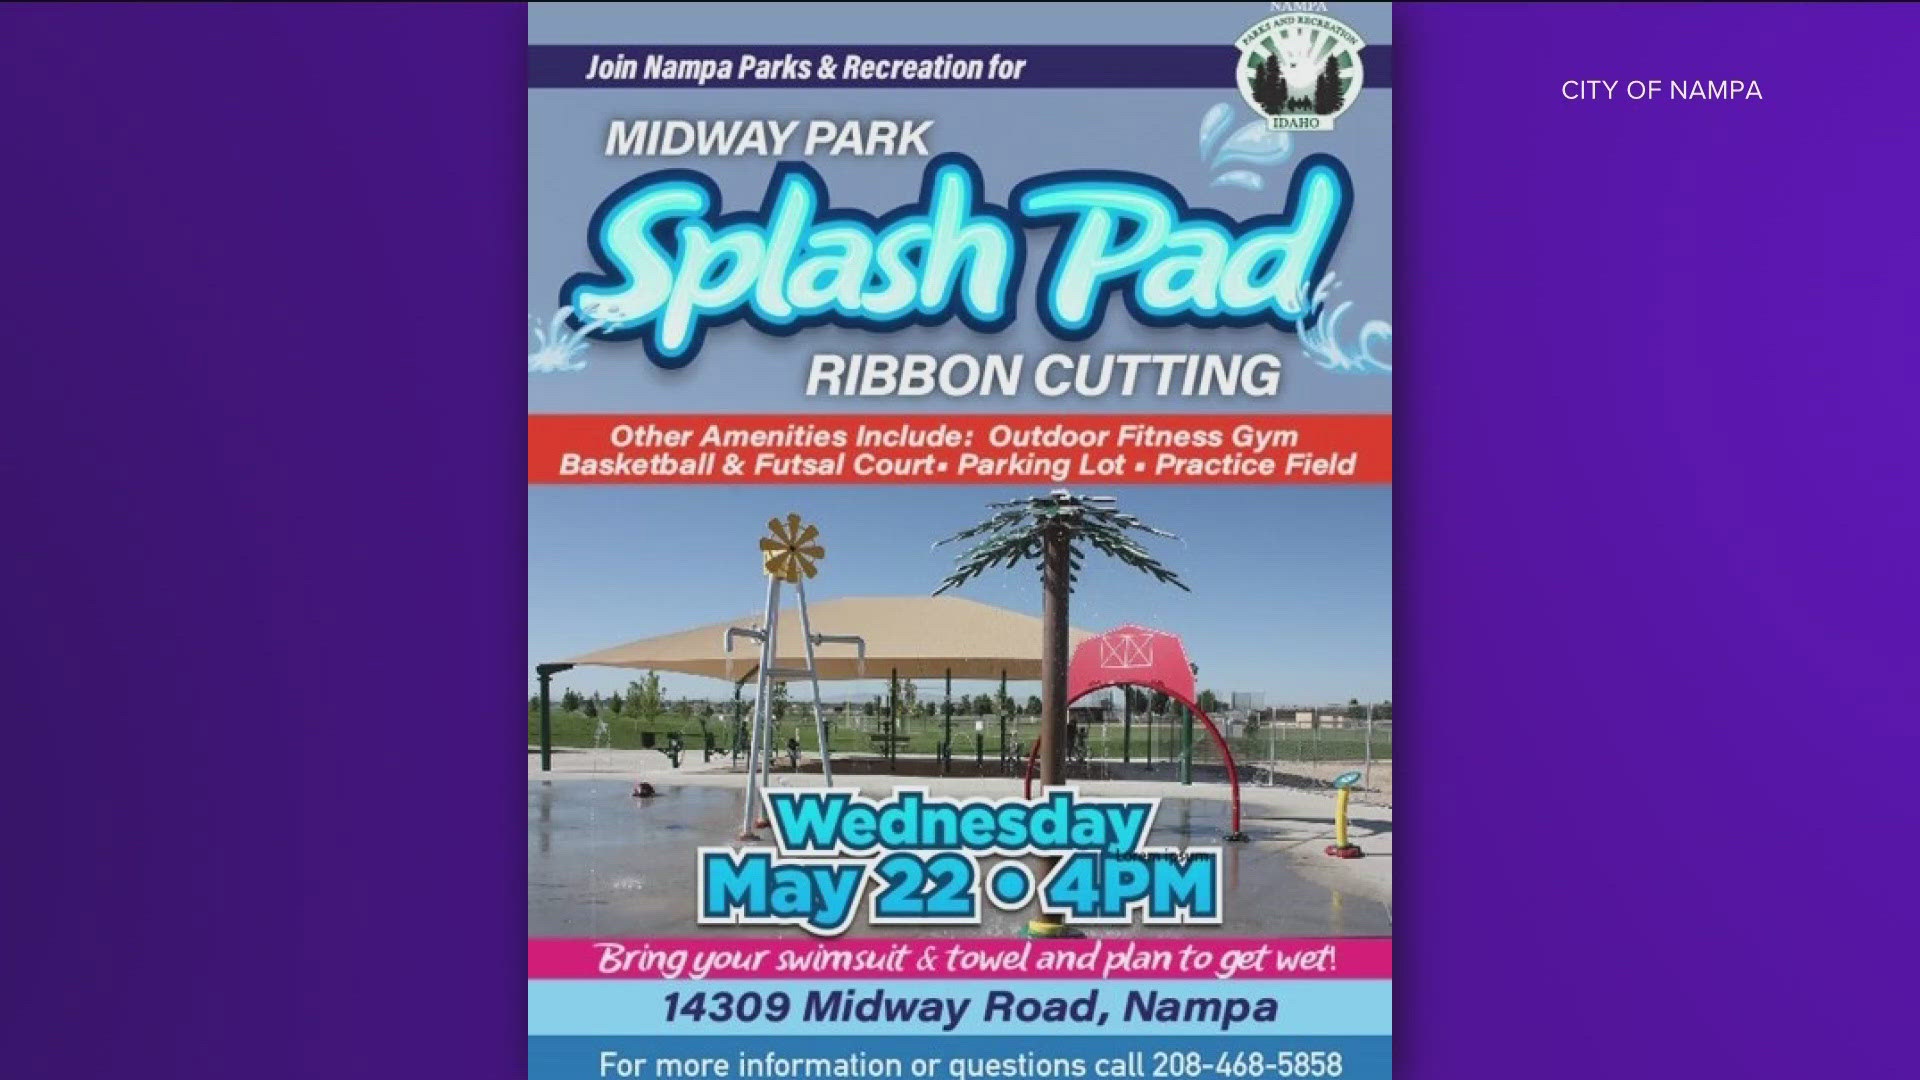 The ribbon-cutting celebration for the park's new splash pad, outdoor fitness gym and other amenities is at 4 p.m. on May 22.